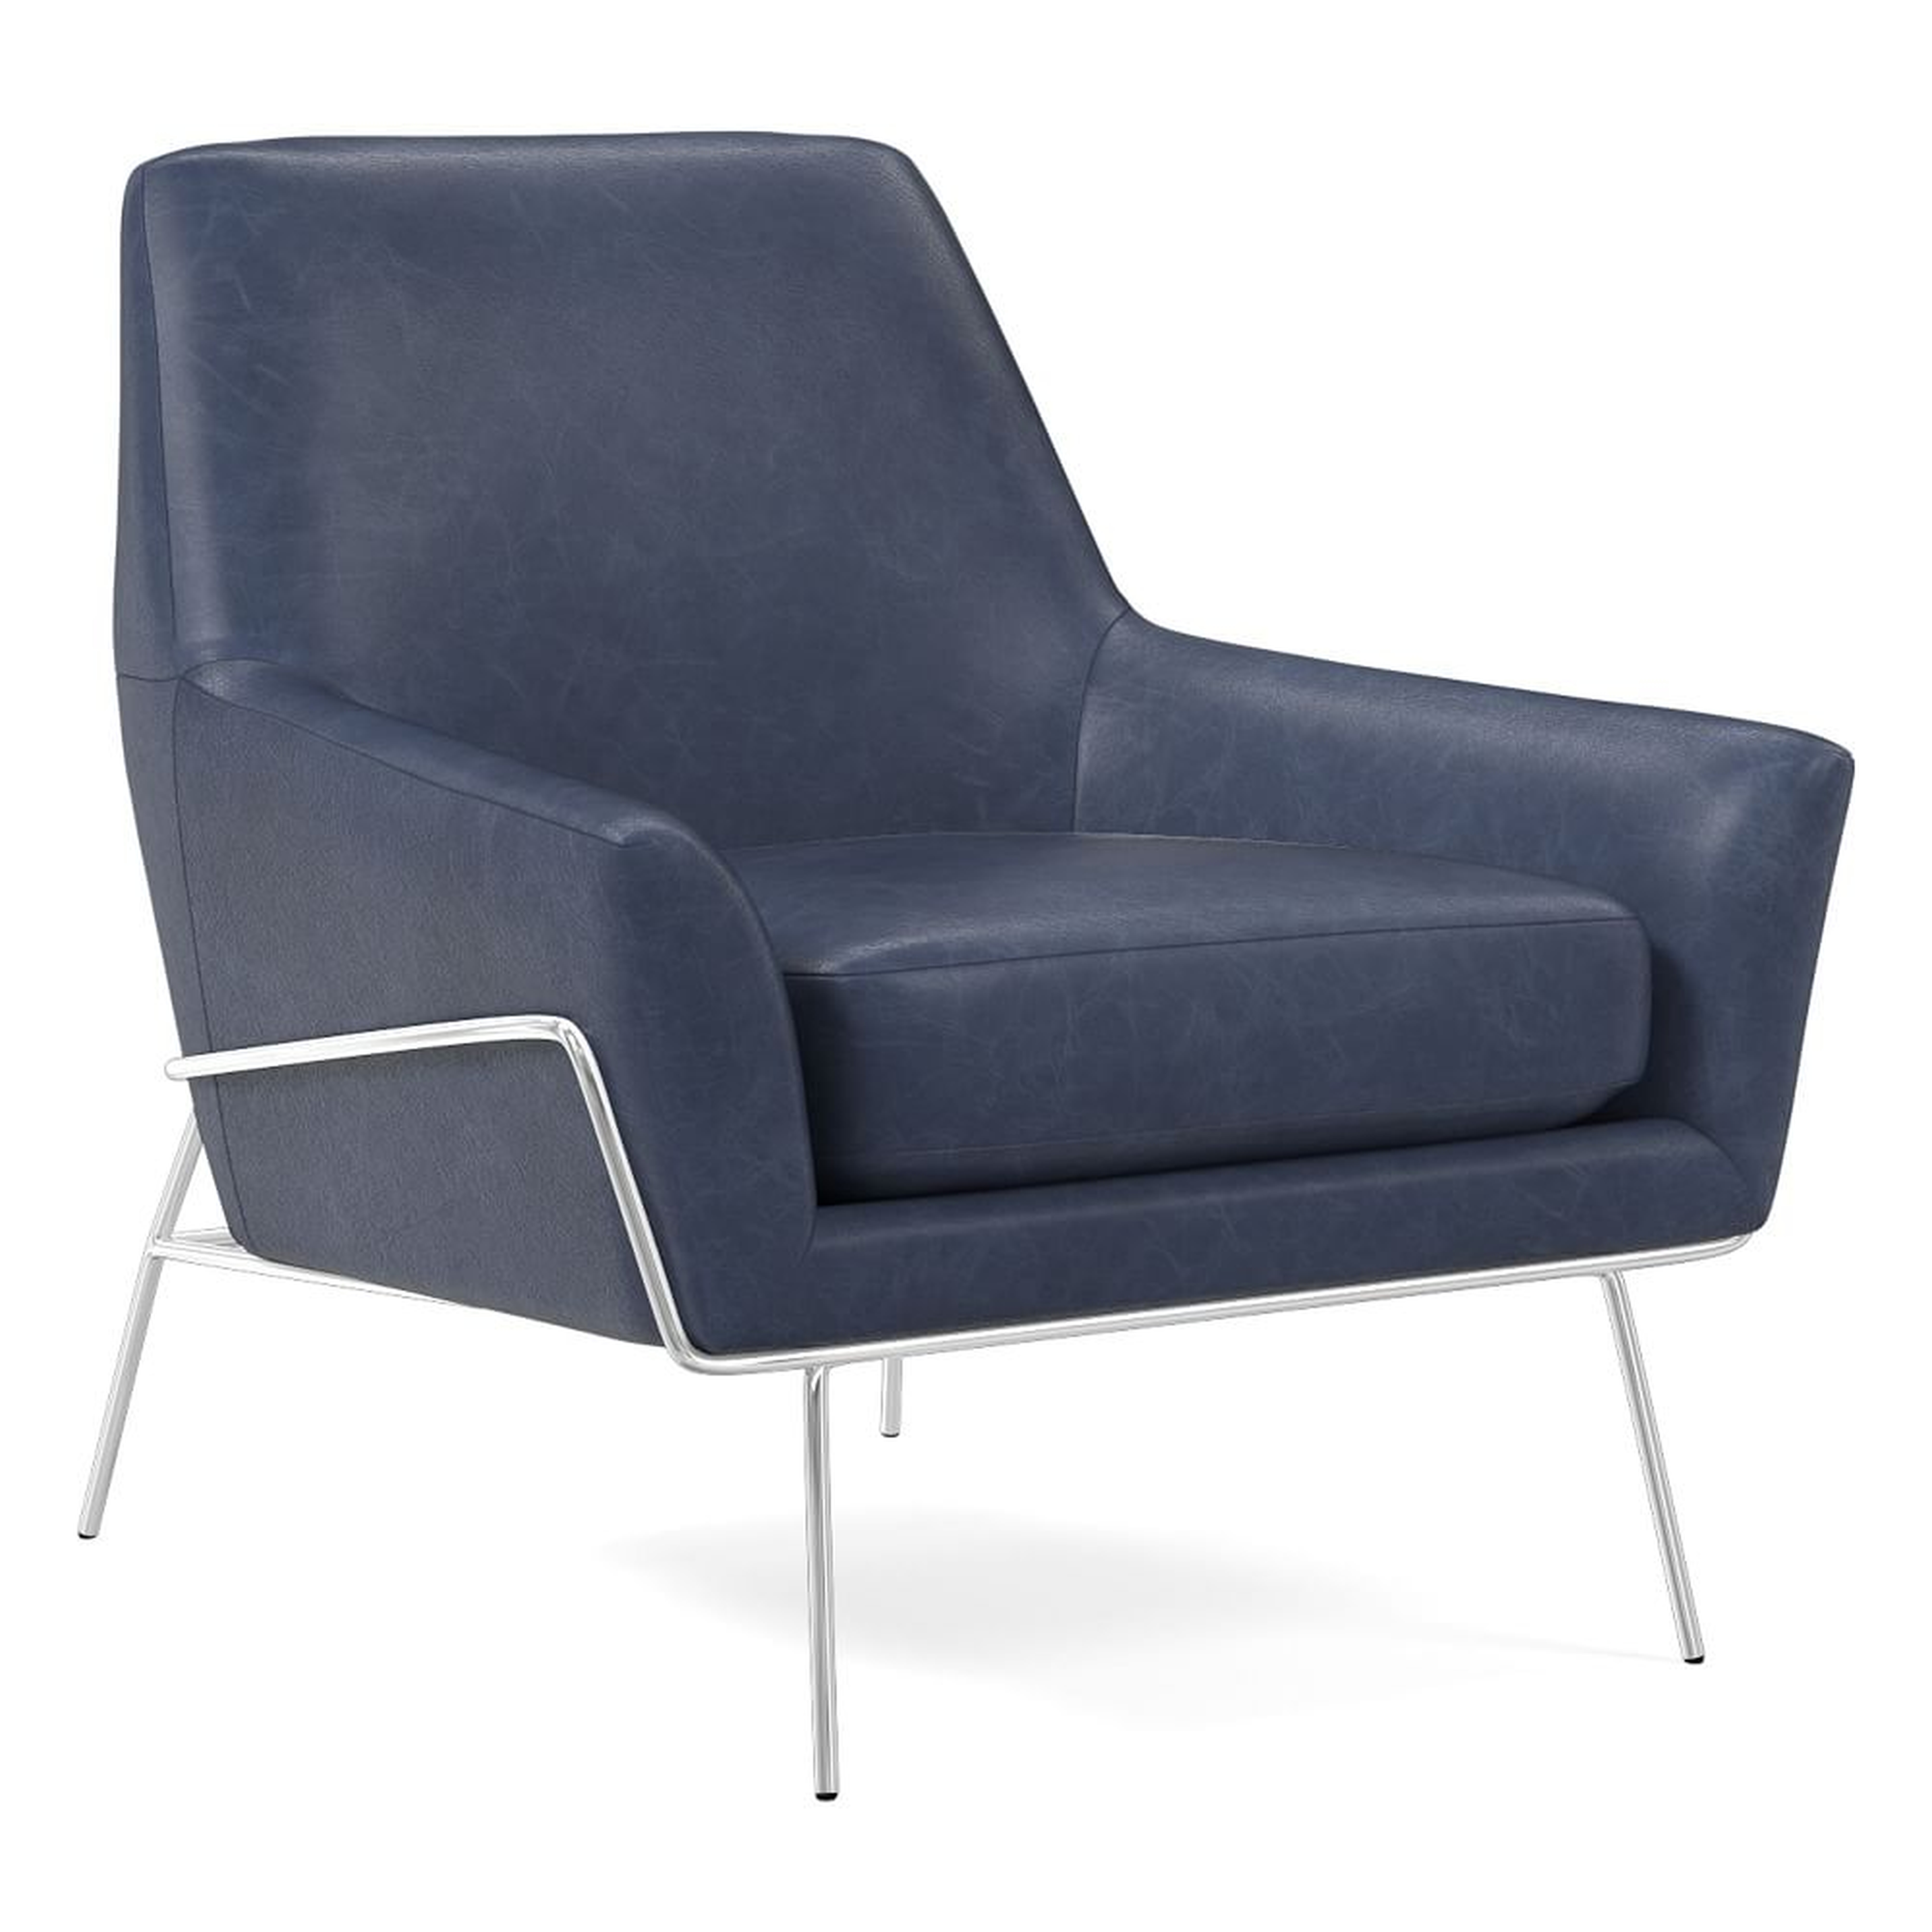 Lucas Wire Base Chair, Poly, Ludlow Leather, Navy, Polished Nickel - West Elm